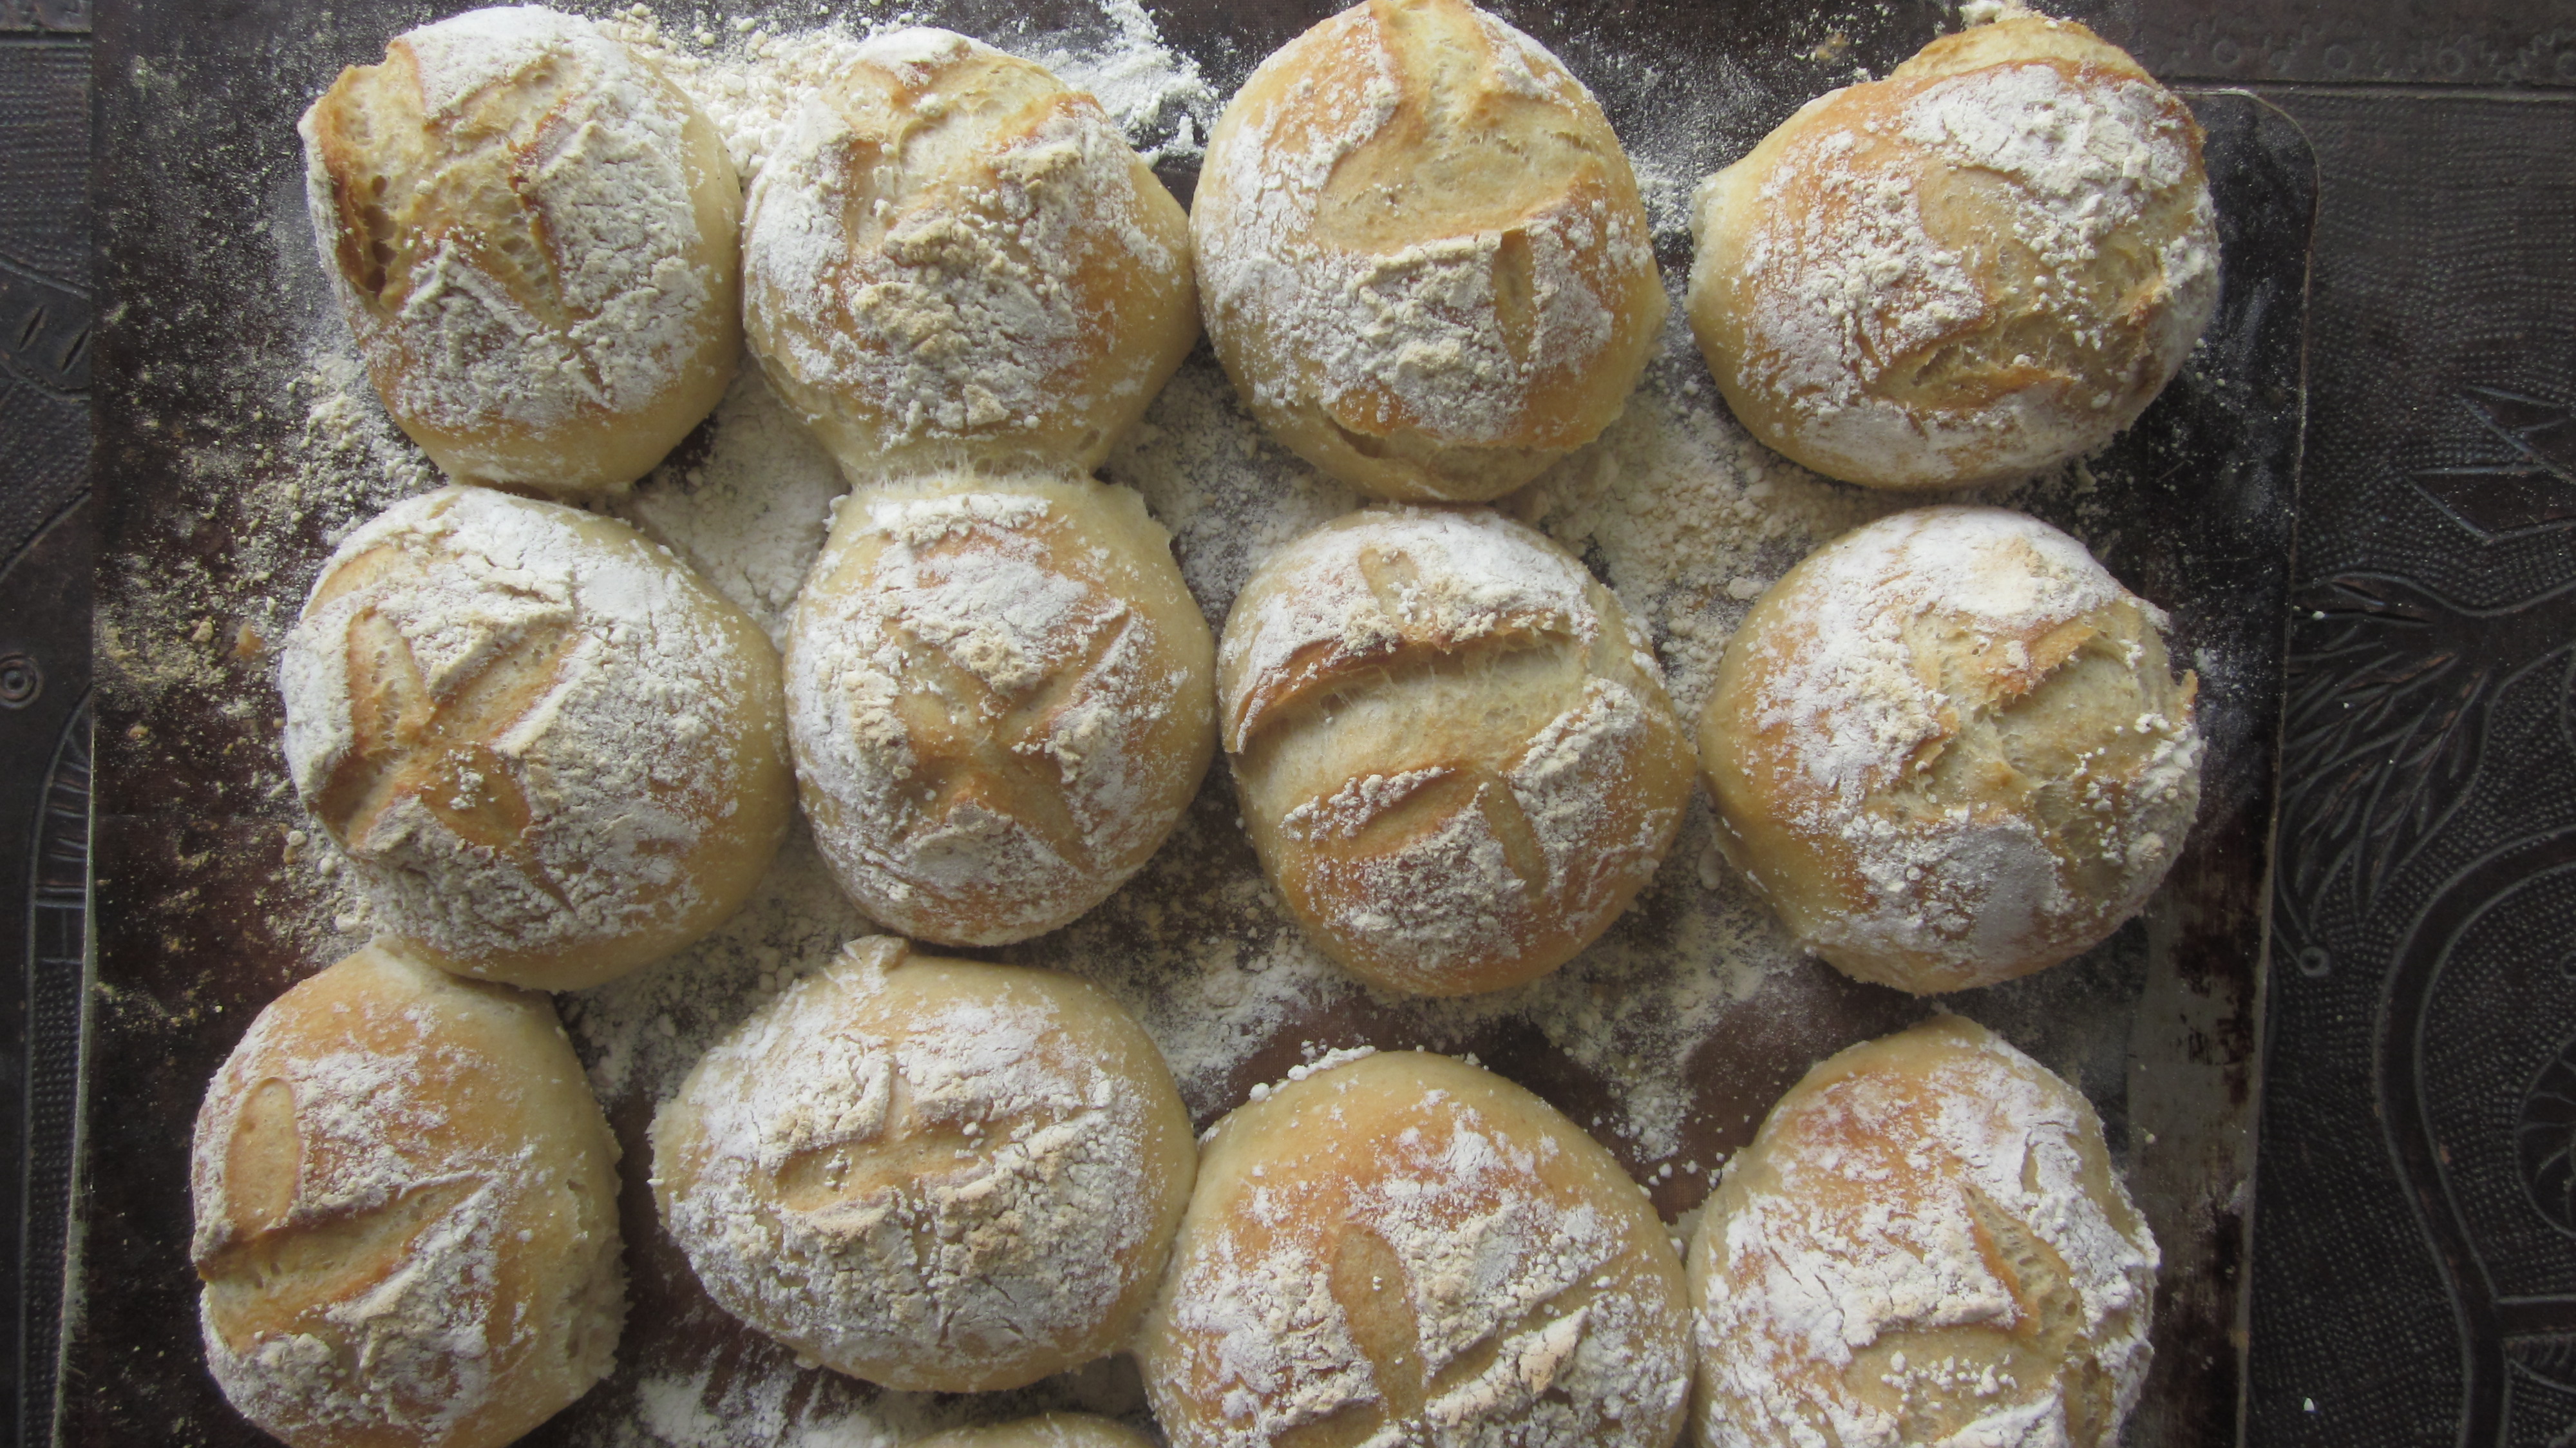 Guest post on “What’s To Eat?” all about my lovely buns!